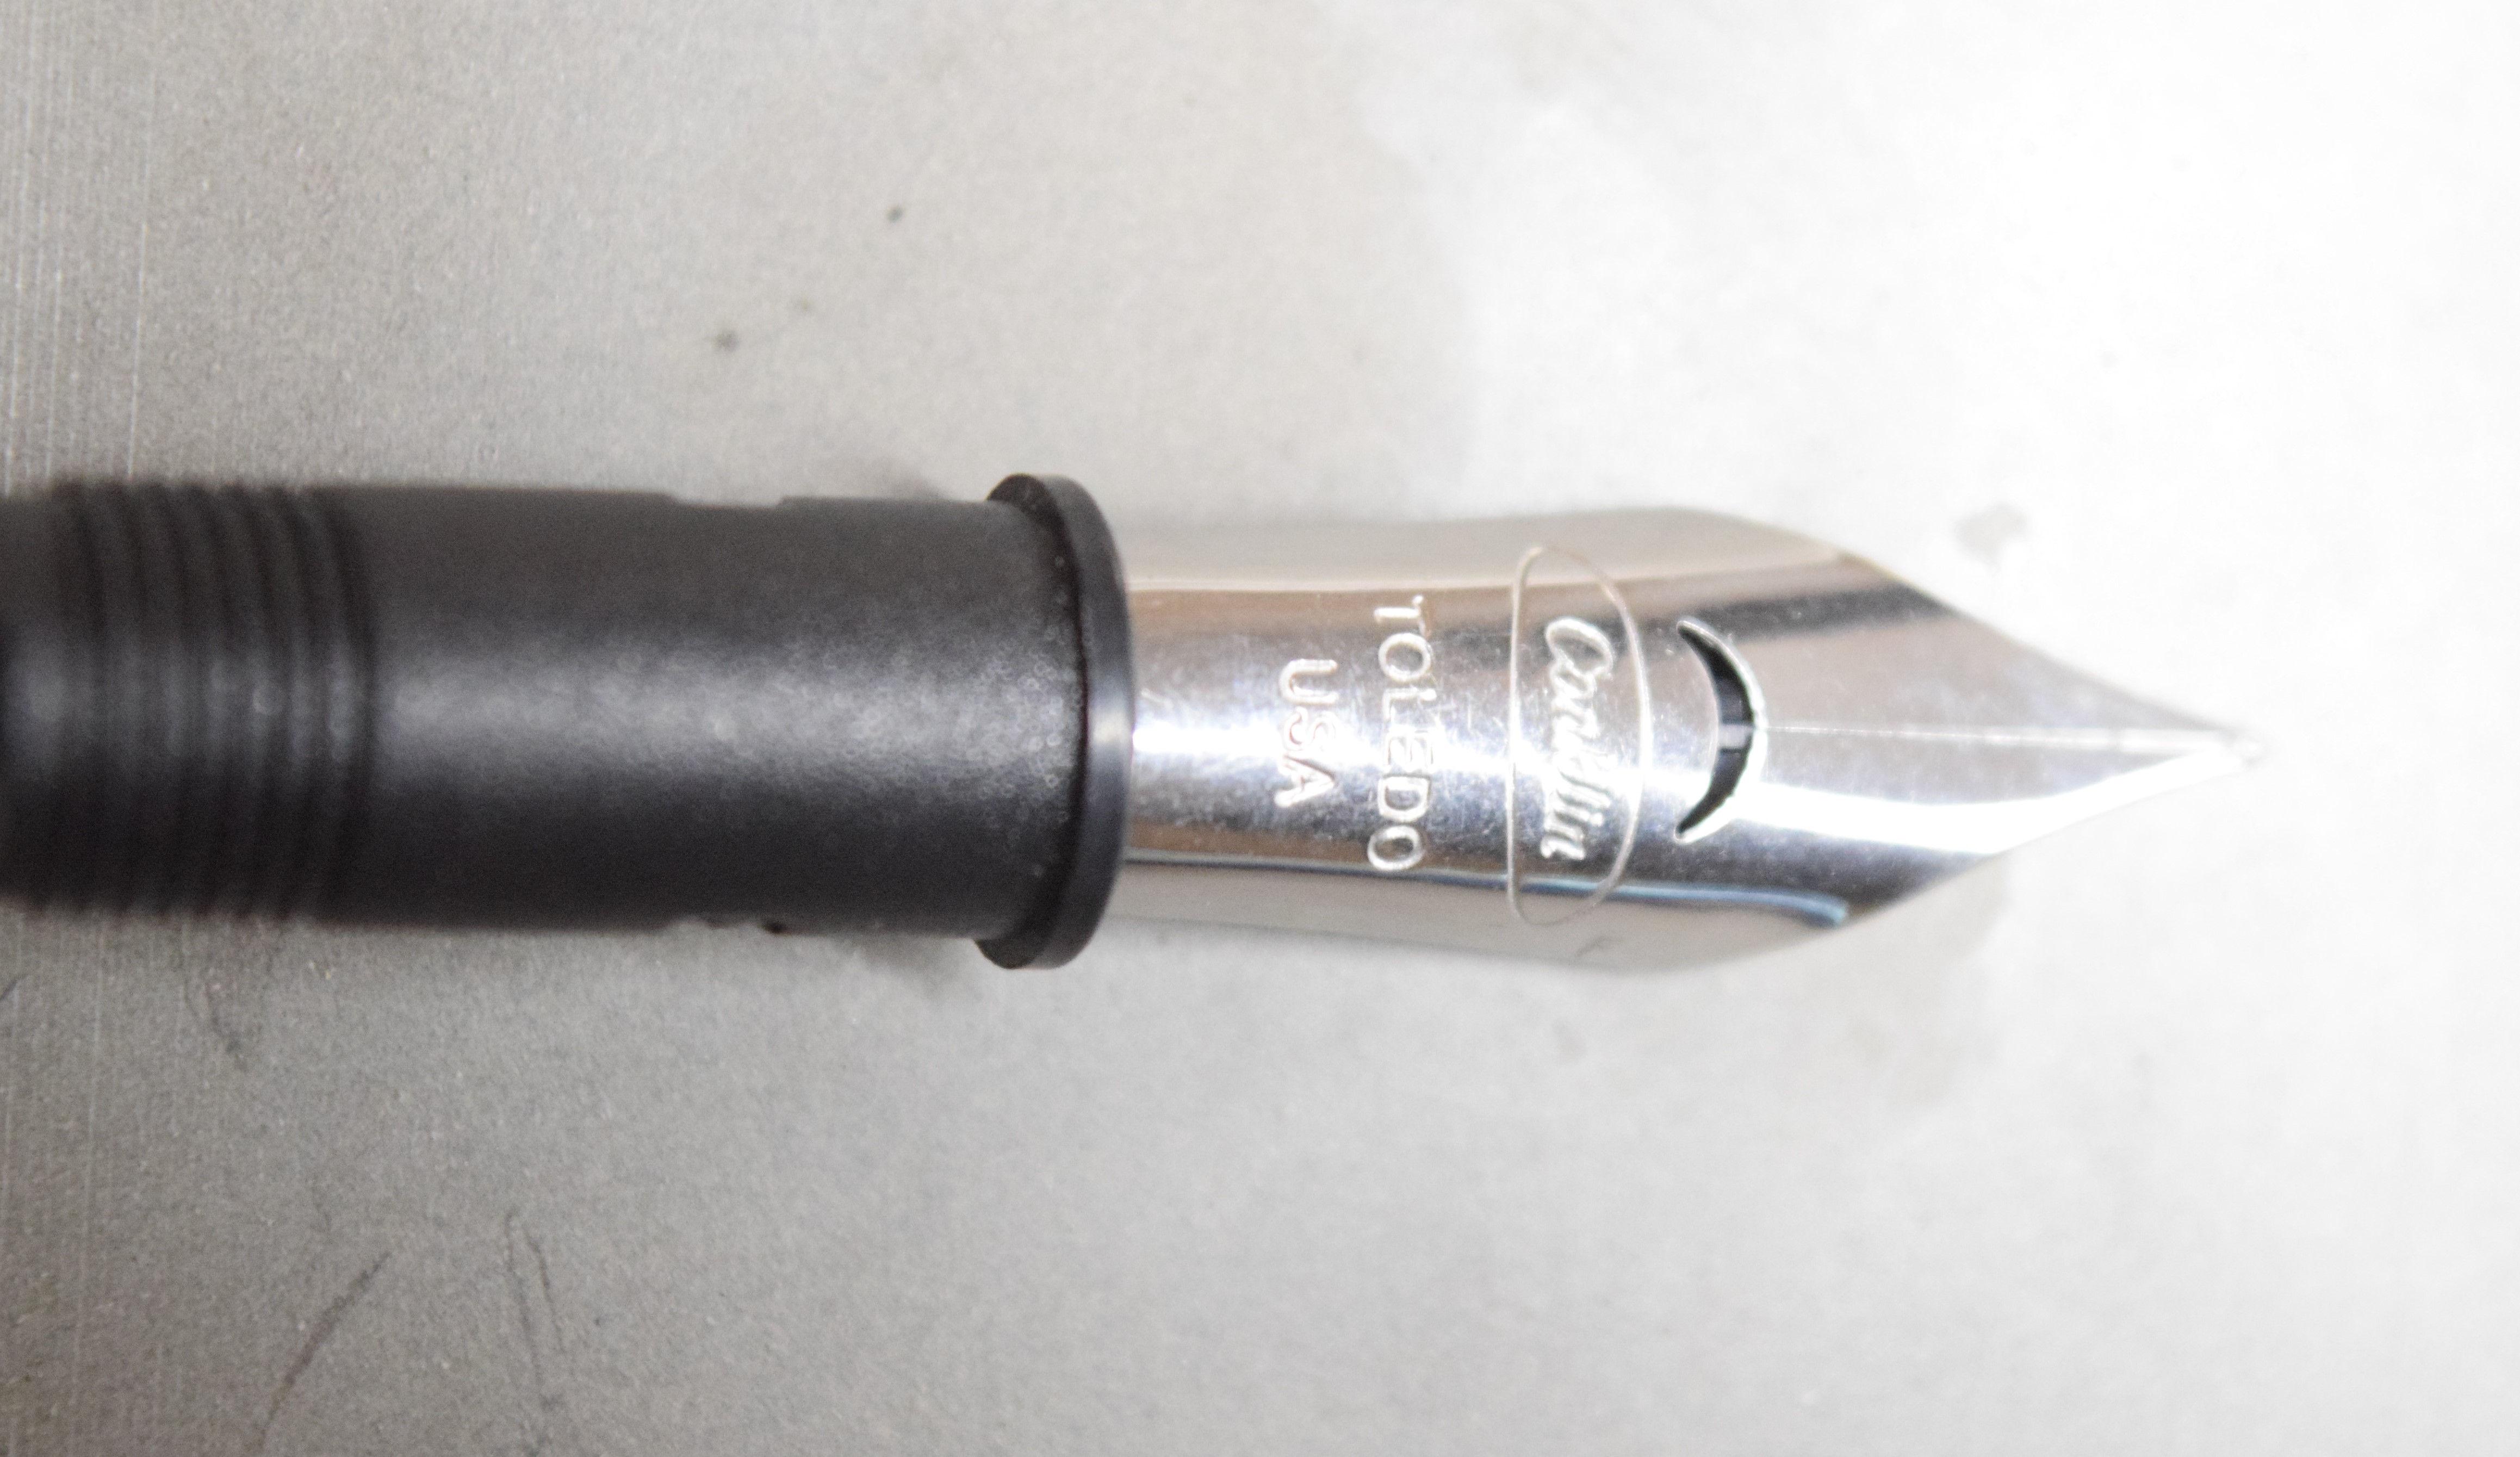 Conklin JoWo #6 Stainless Steel Nib Unit with housing